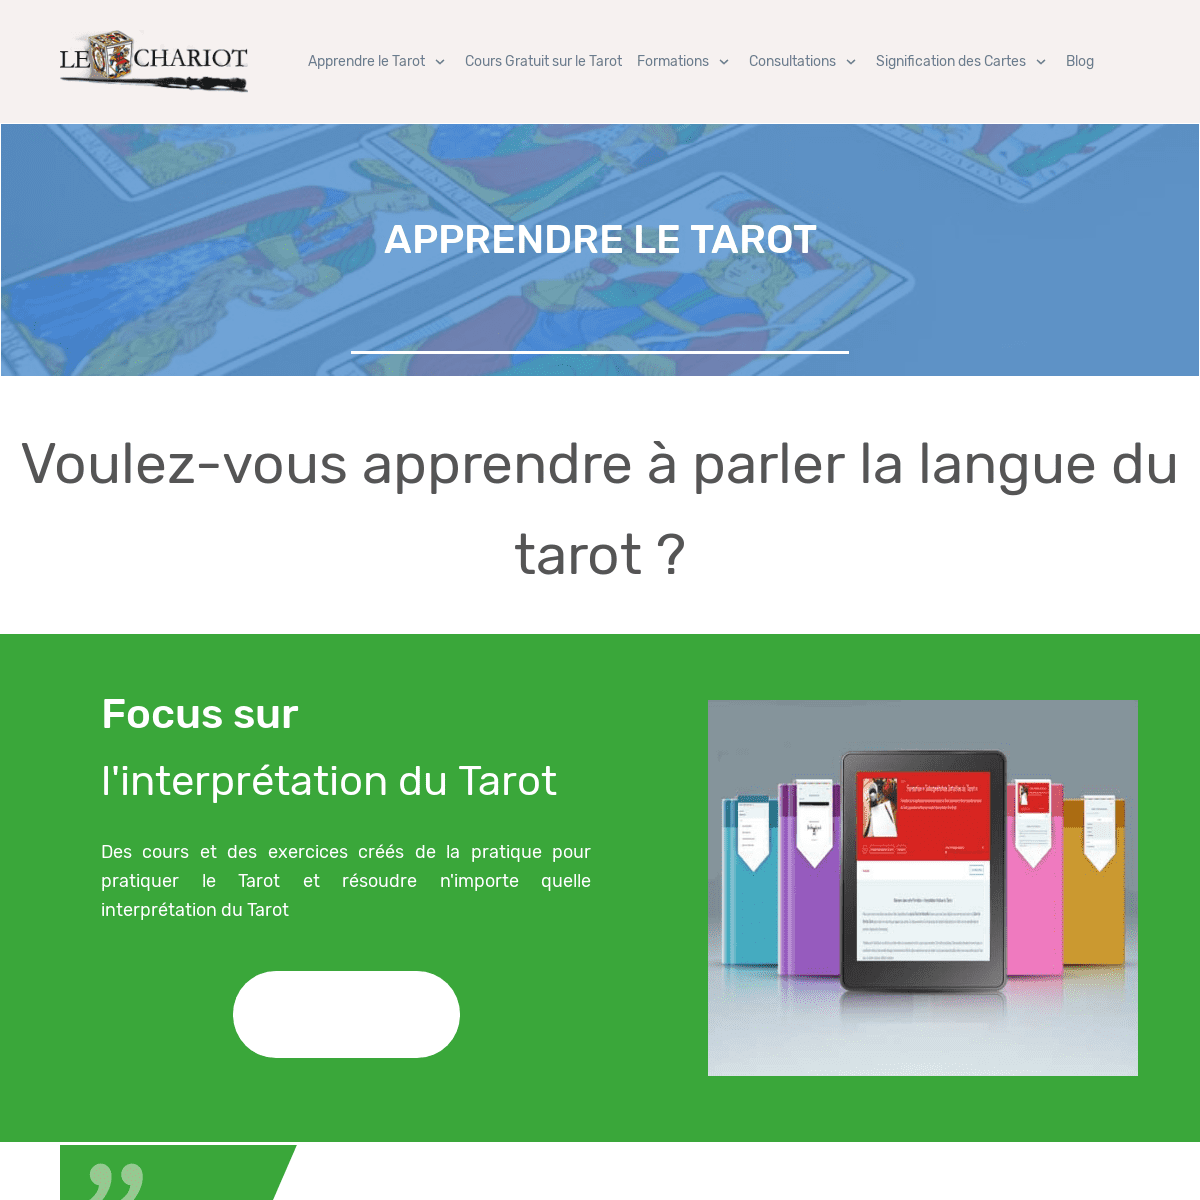 A complete backup of le-chariot.com